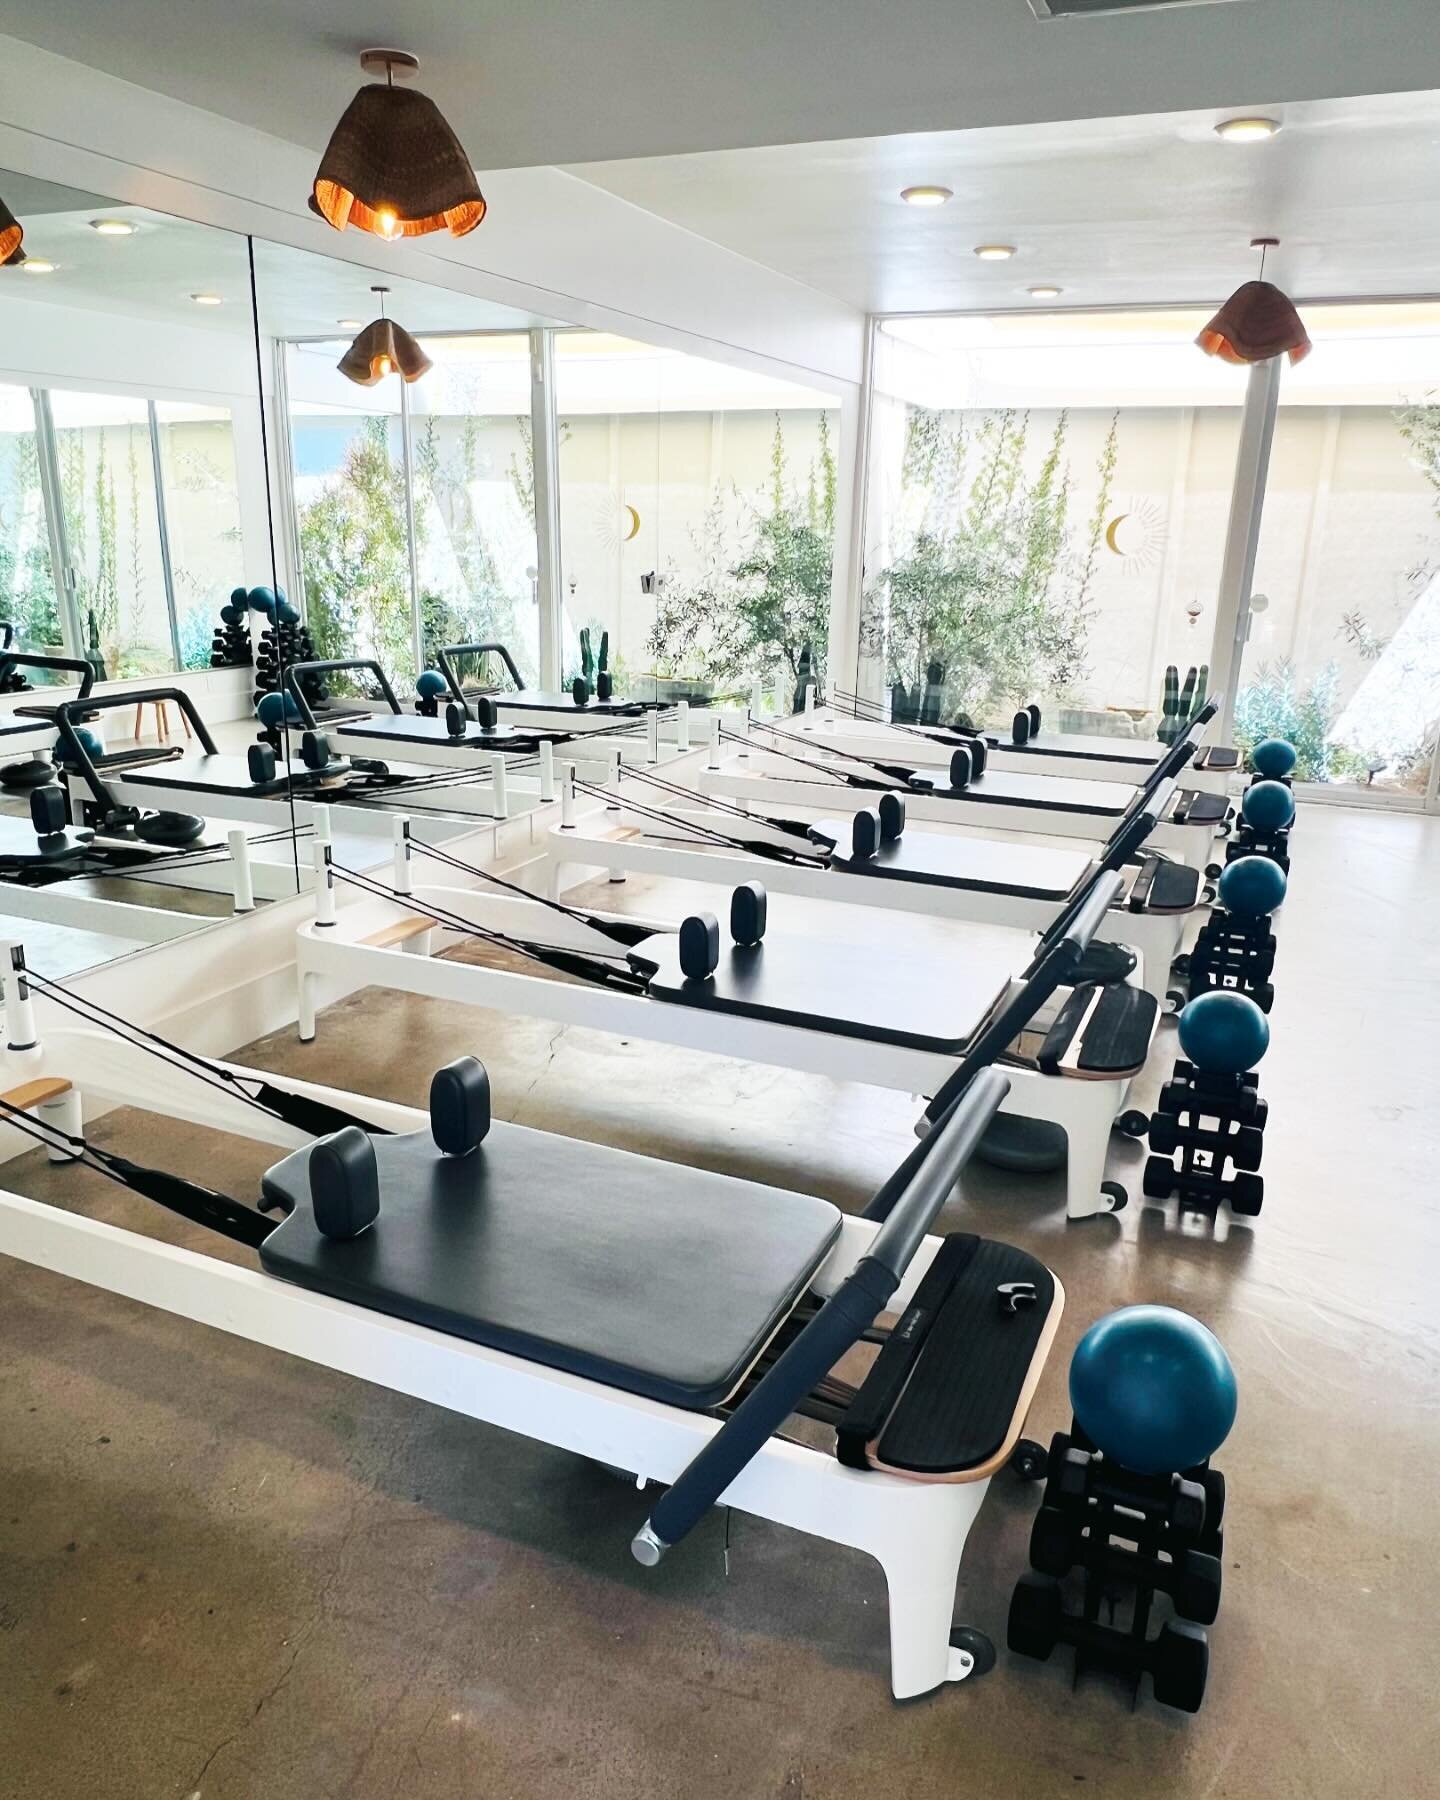 Spring is here! The COVE has a fresh new look with our reformer line up! Also, a spring SALE and new schedule coming soon! Stay tuned! 
.
.
.
.
.
.
#alignment #springrenewal #feelgood #pilatesstudio #pilatesbody #pilatesworkout #athleticpilates #refo